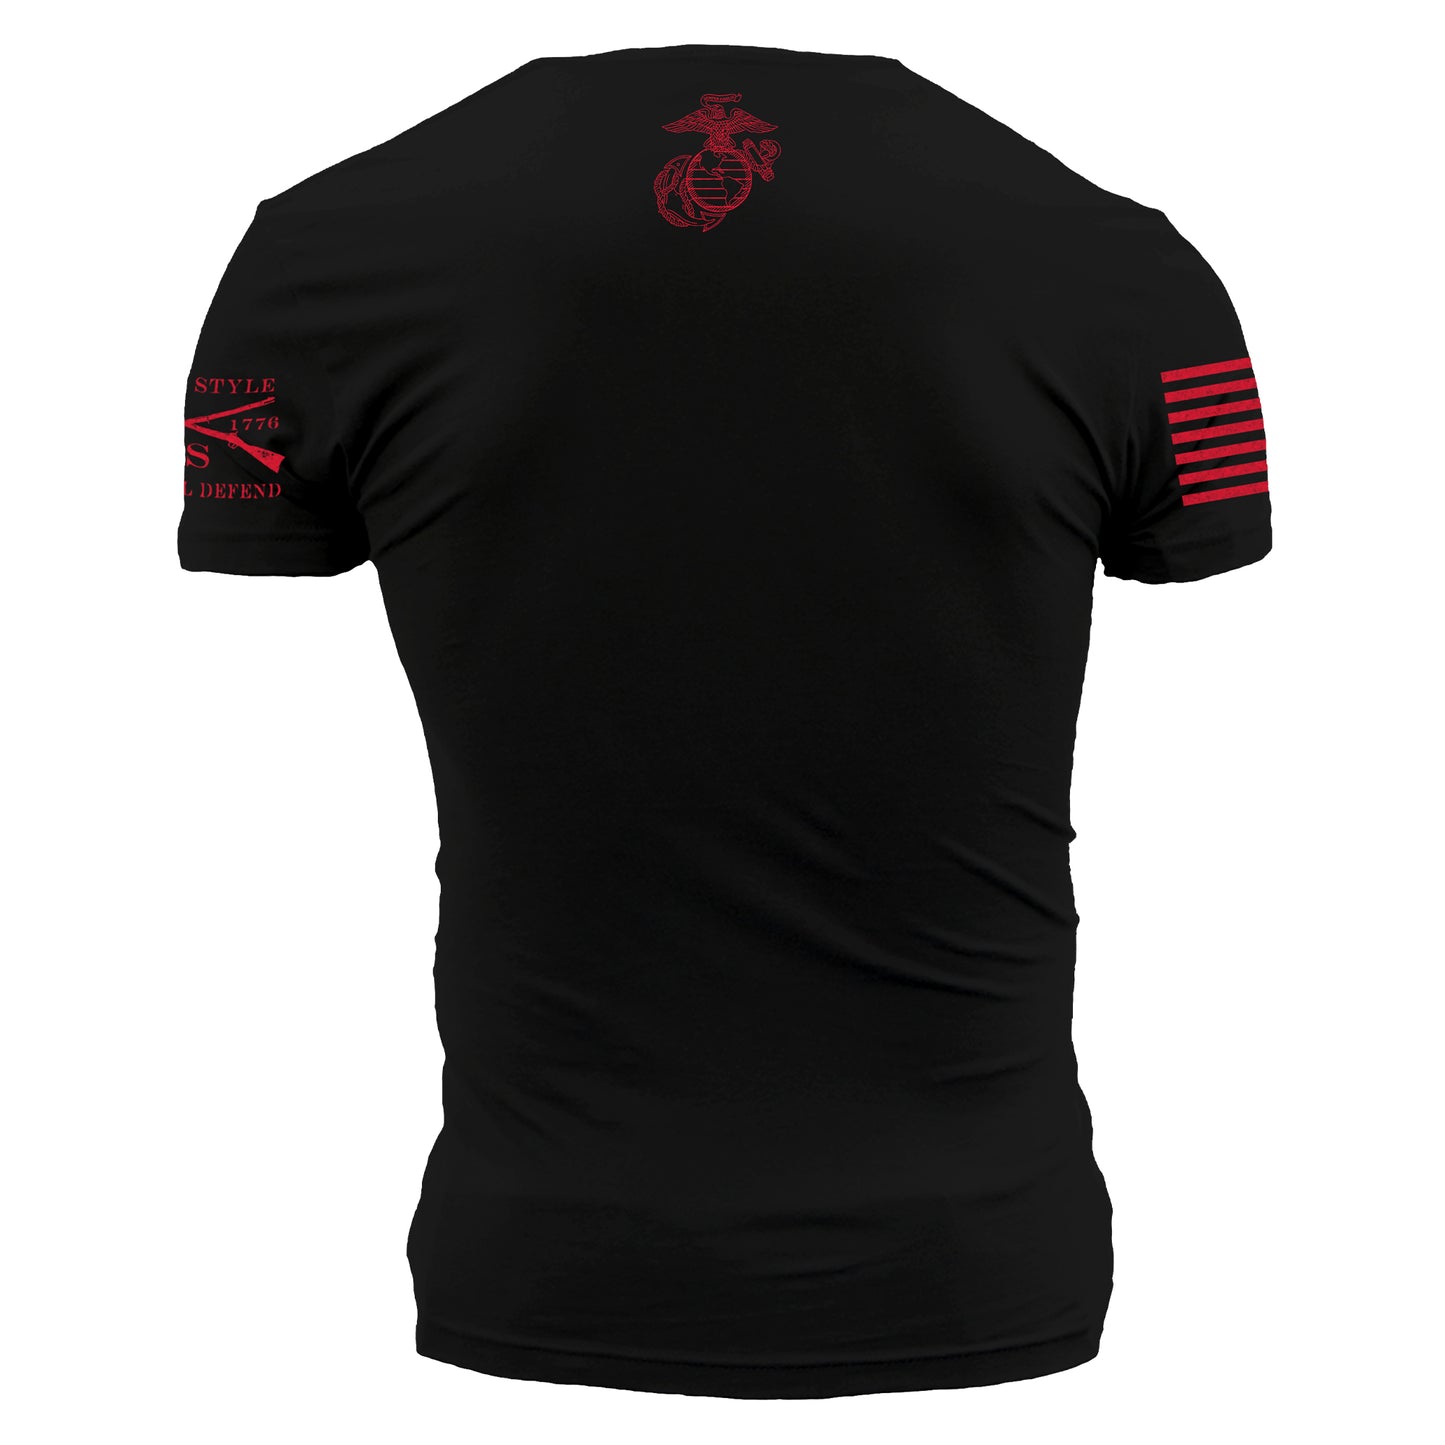 Black and Red USMC Est. 1775 Tee for Men | Grunt Style 